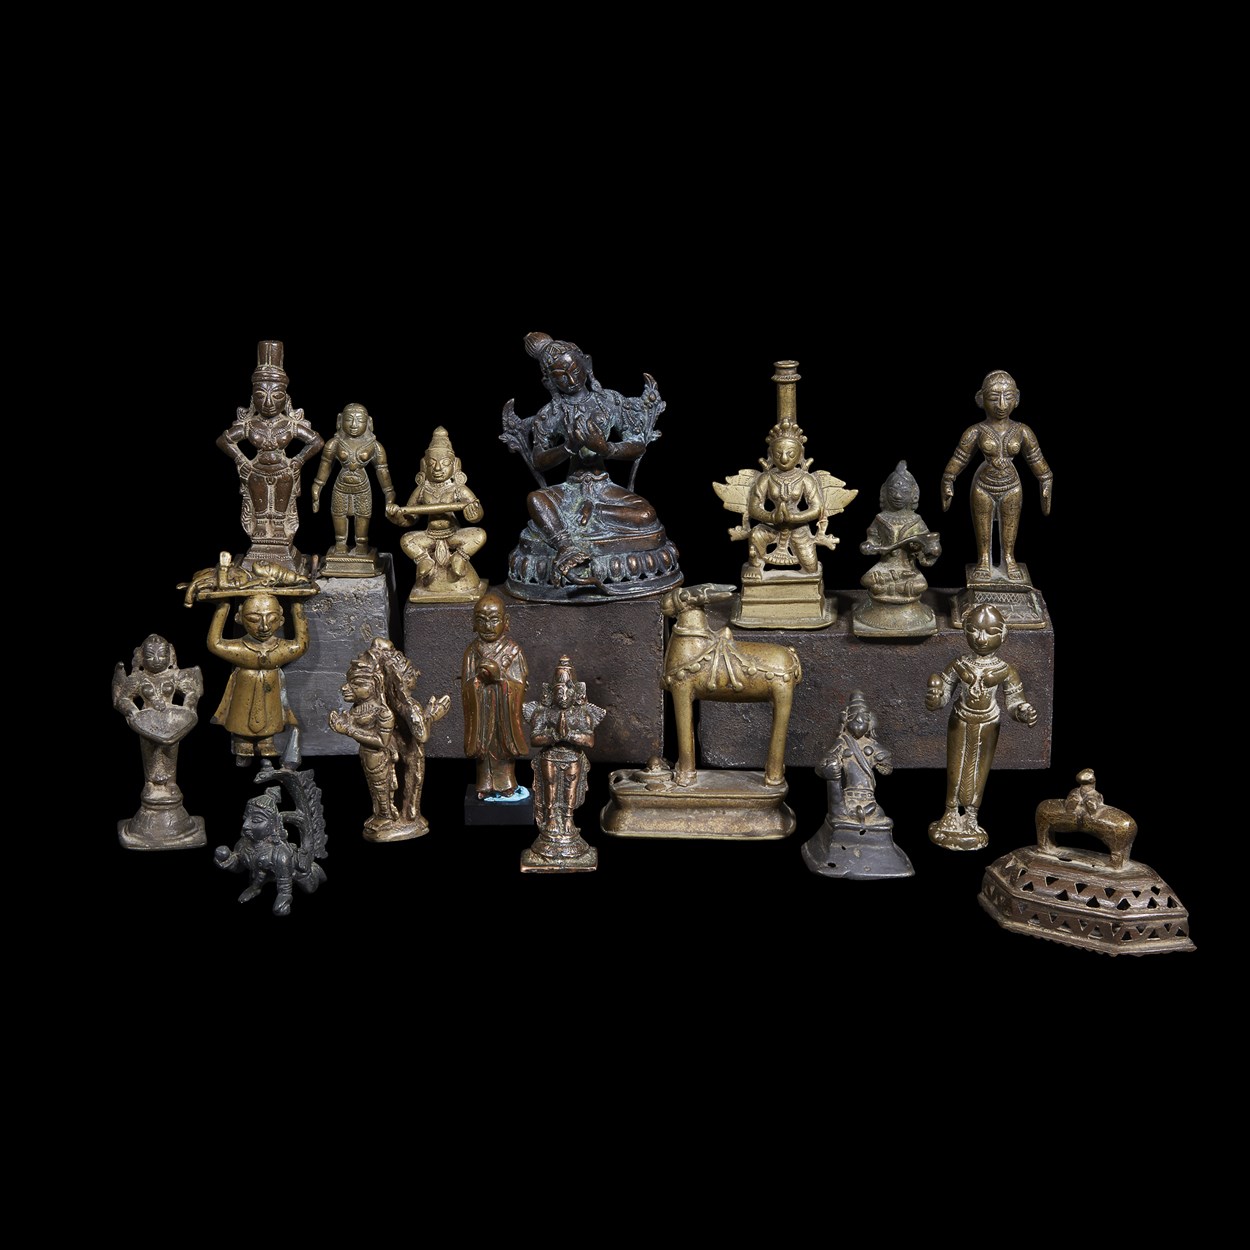 Lot 132 - Group of 17 assorted small Indian, Chinese and Asian bronze and copper alloy figures